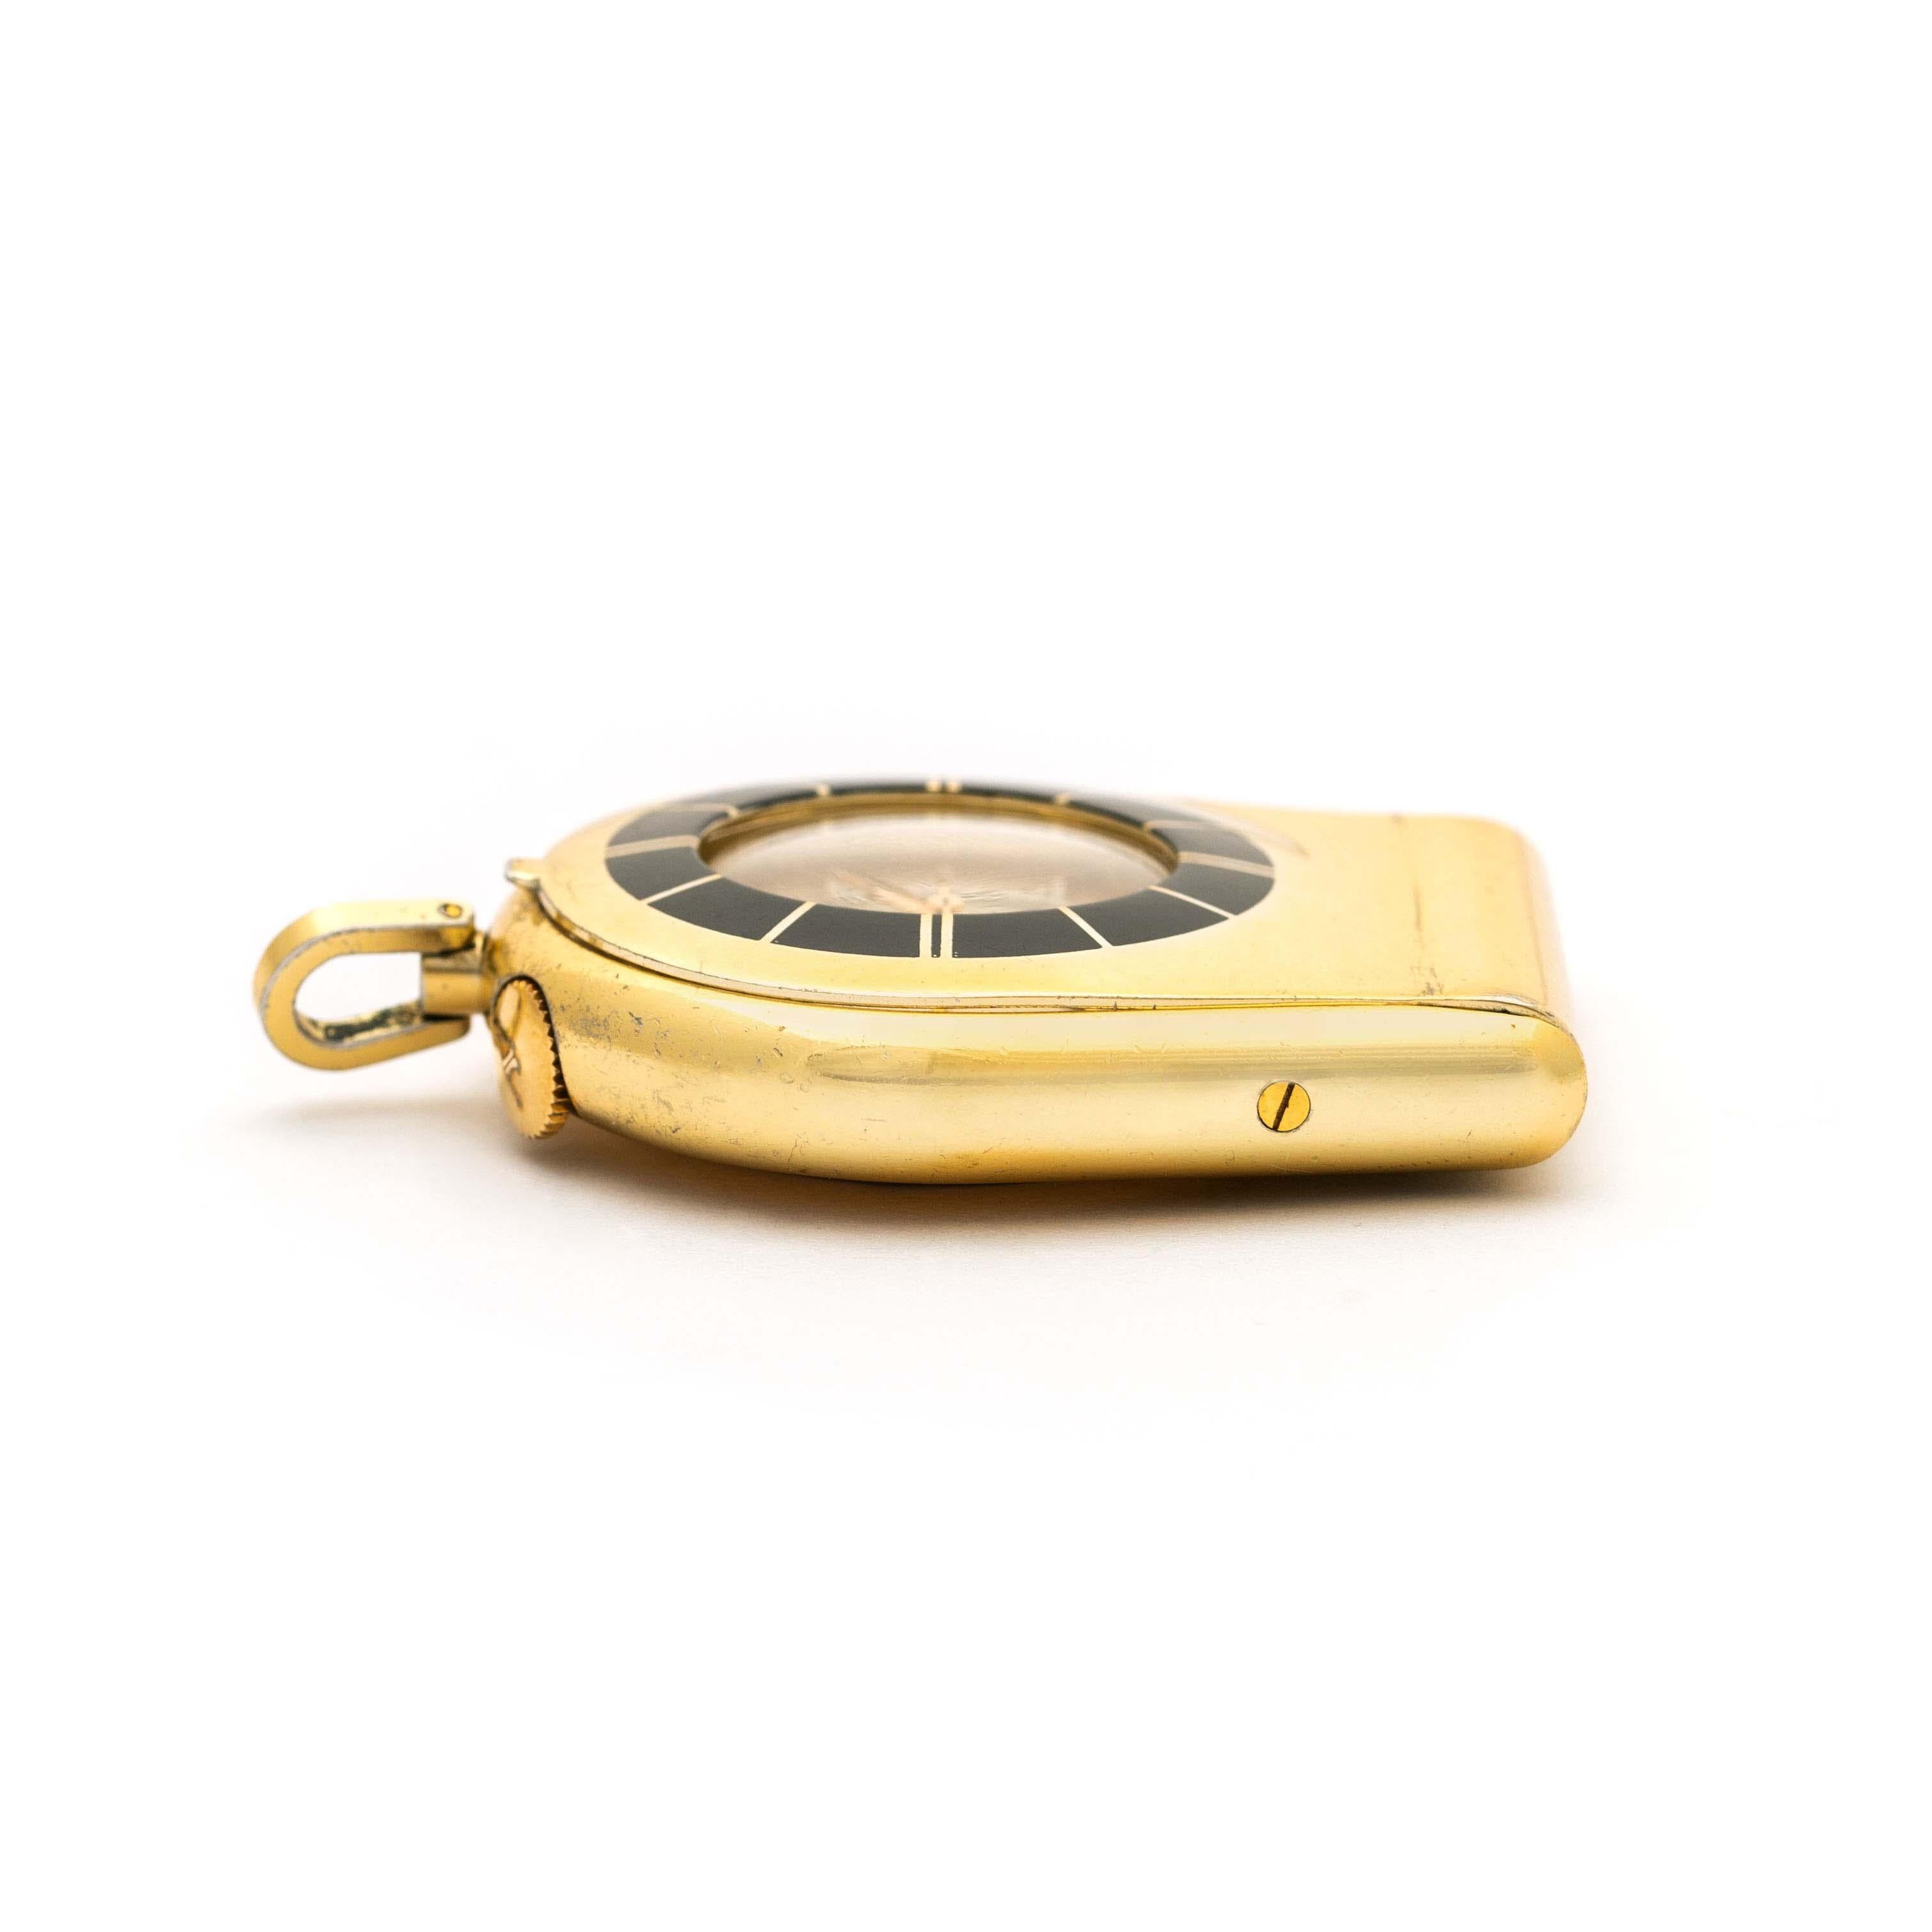 Jaeger-LeCoultre. Gold-Plated Metal Pocket Watch In Fair Condition For Sale In Geneva, CH